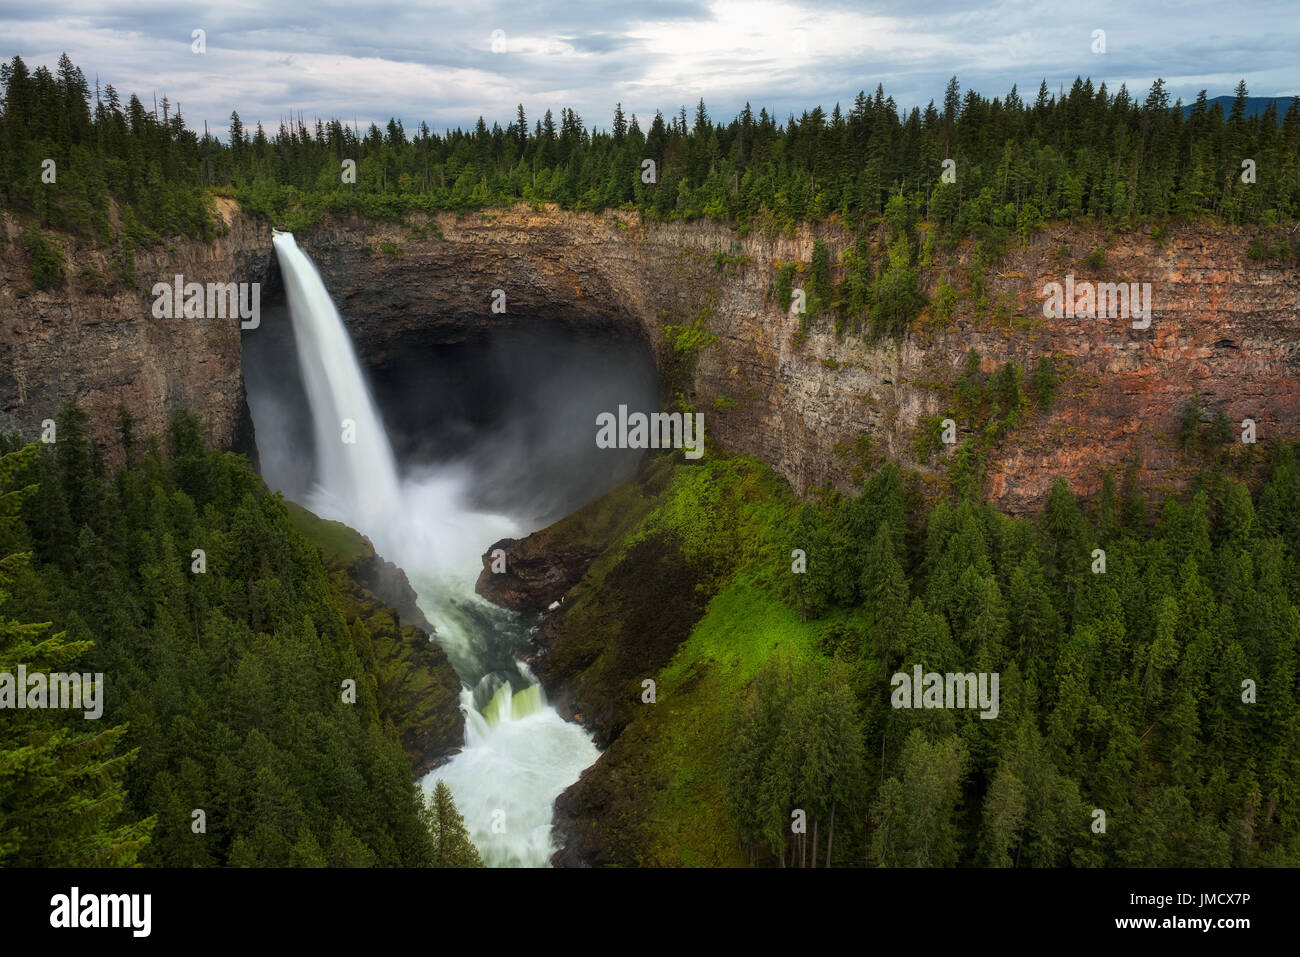 Helmcken Falls in Wells Gray Provincial Park near Clearwater, British Columbia, Canada. Long exposure. Stock Photo